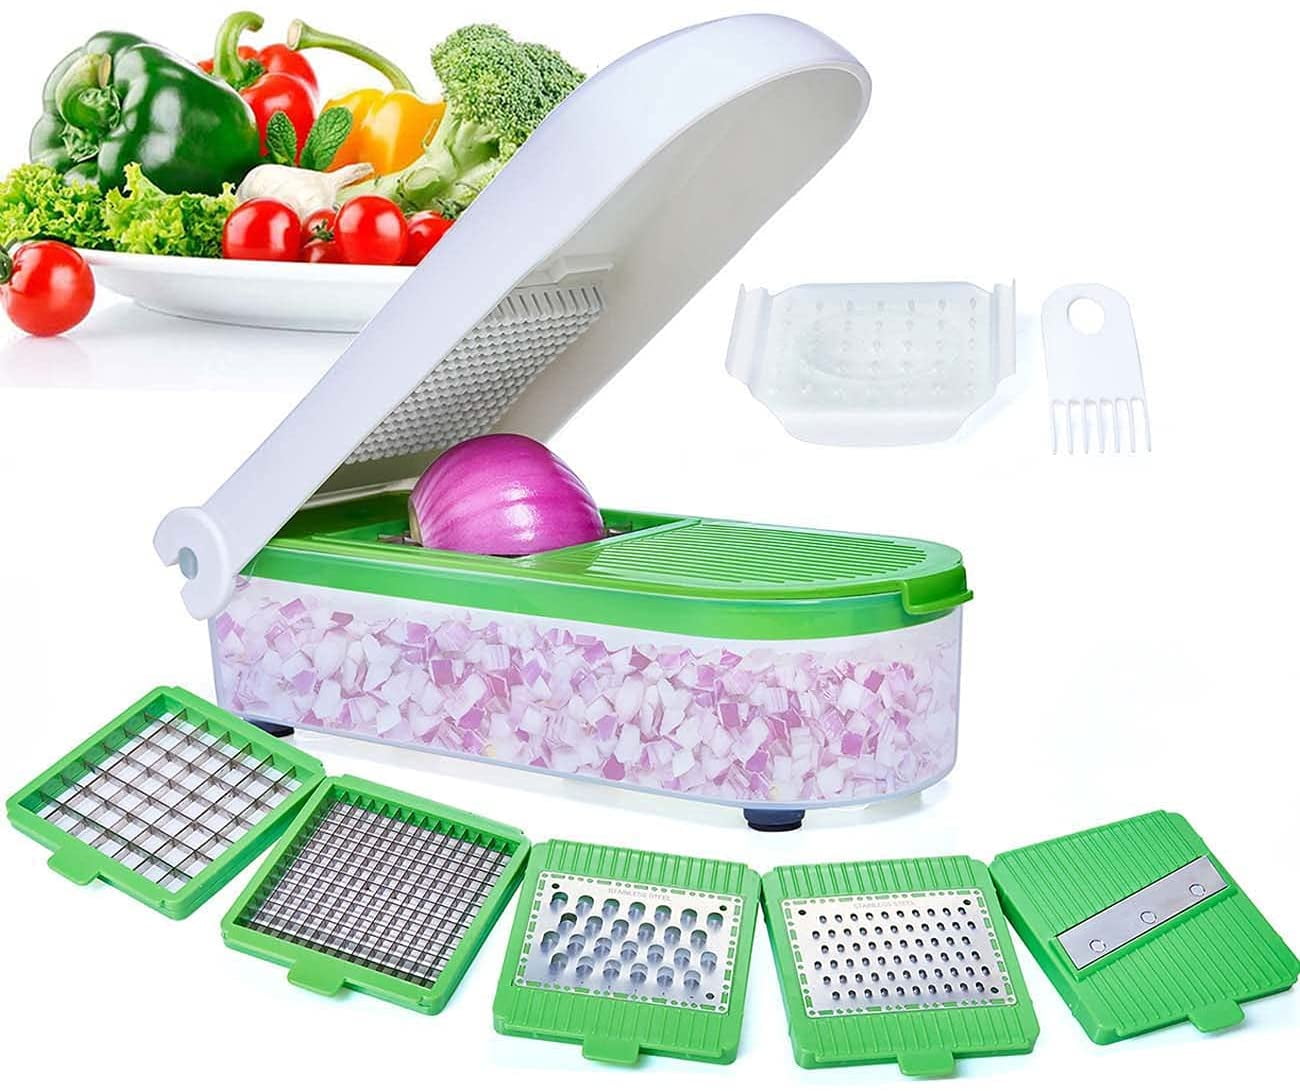 Vegetable Chopper Pro Onion Chopper by Bellemain Heaviest Duty, Vegetable  Dicer Includes Interchangeable Inserts for 1/4 Dice, 1/2 Dice ; 1/4  Julienne, Catchment/Storage Container, - Bellemain